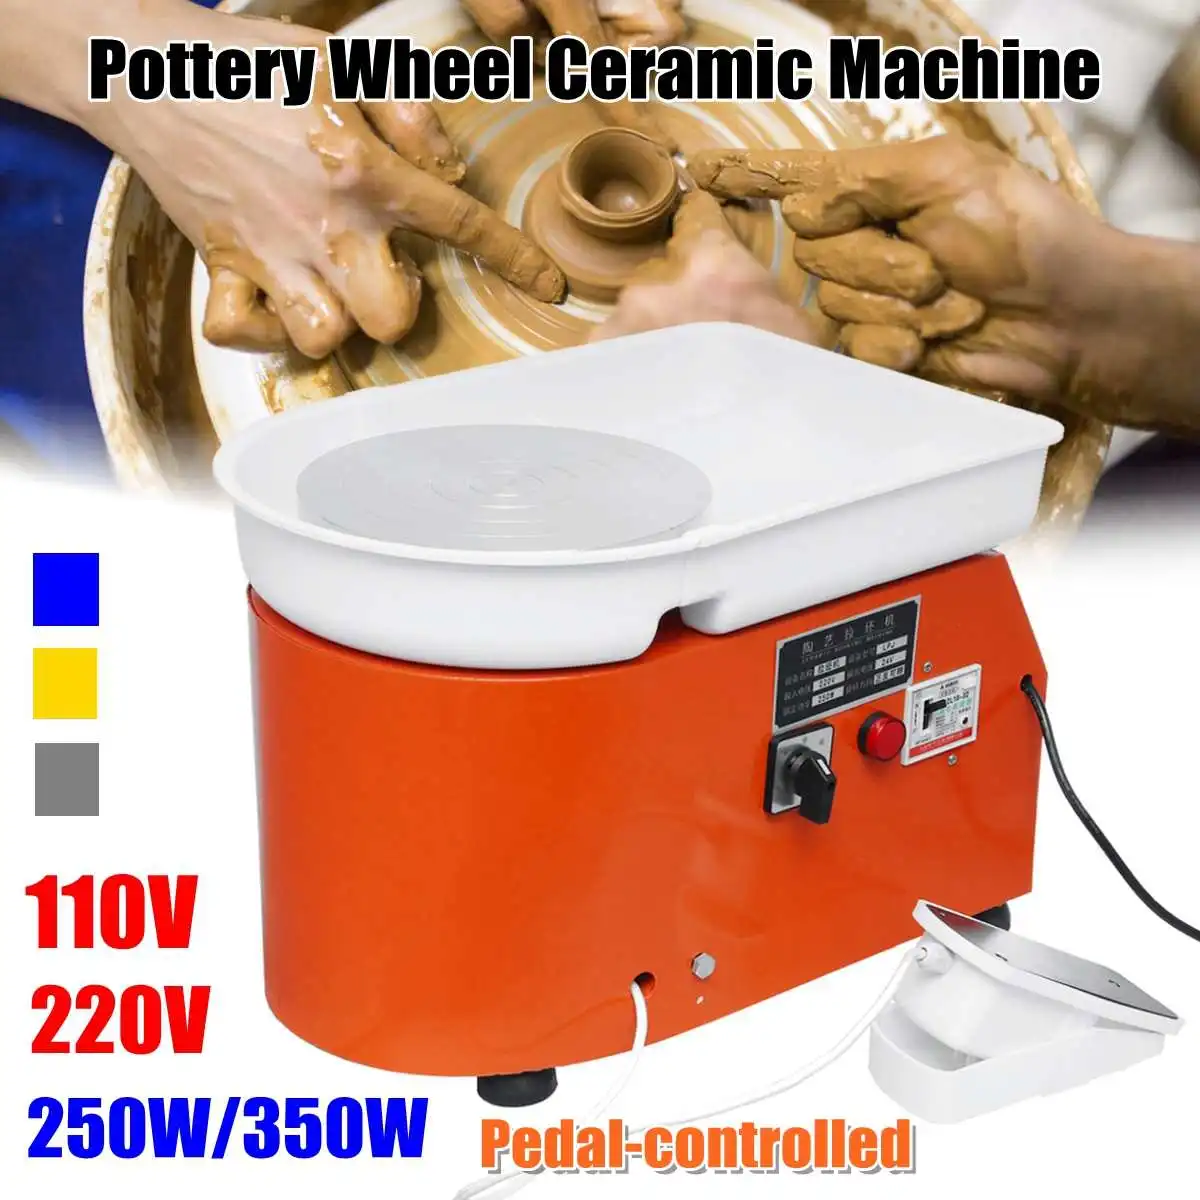 

Pottery Forming Machine 110V/220V 350W Electric Pottery Wheel DIY Clay Tool with Tray Flexible Foot Pedal For Ceramic Work